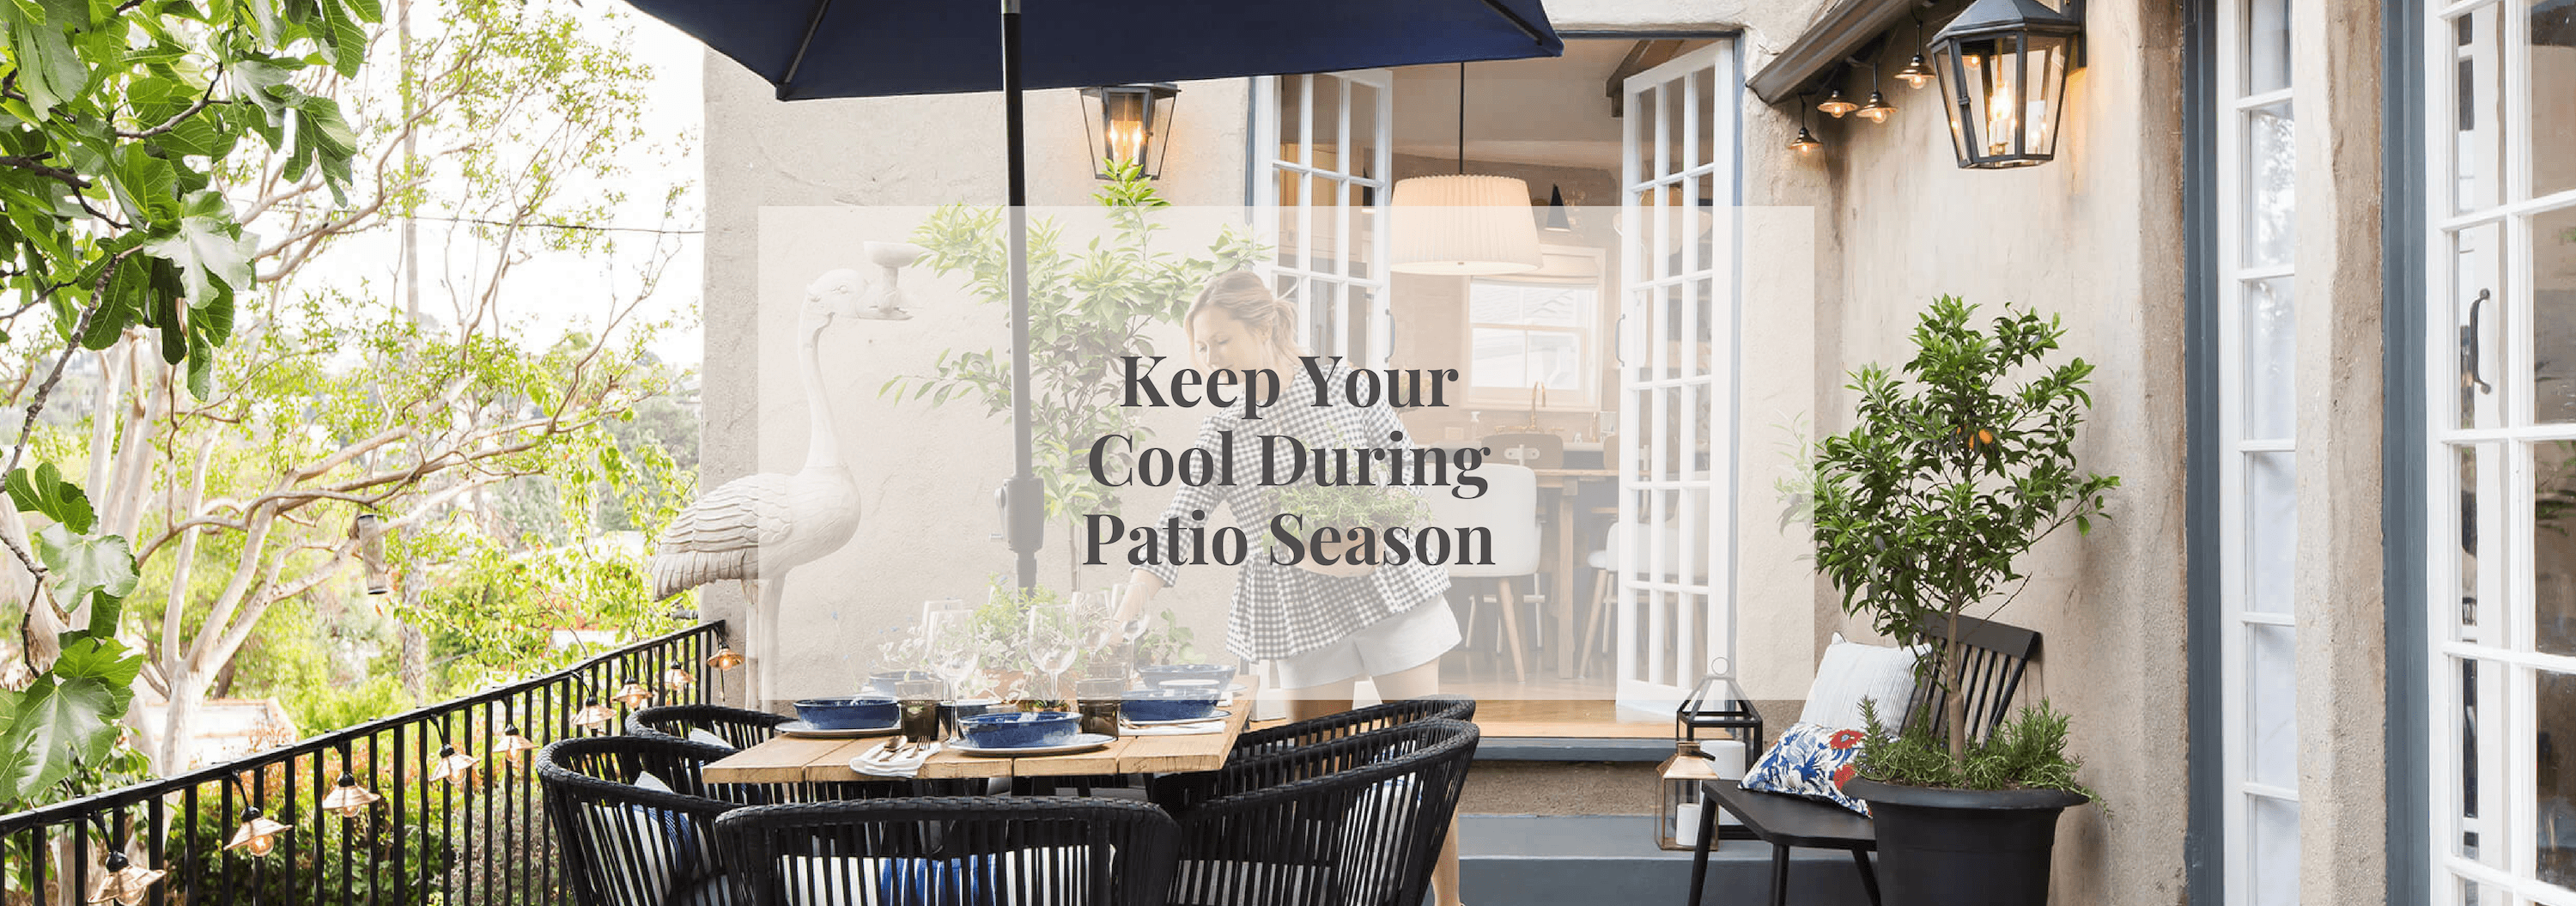 Keep Your Cool During Patio Season - Numi